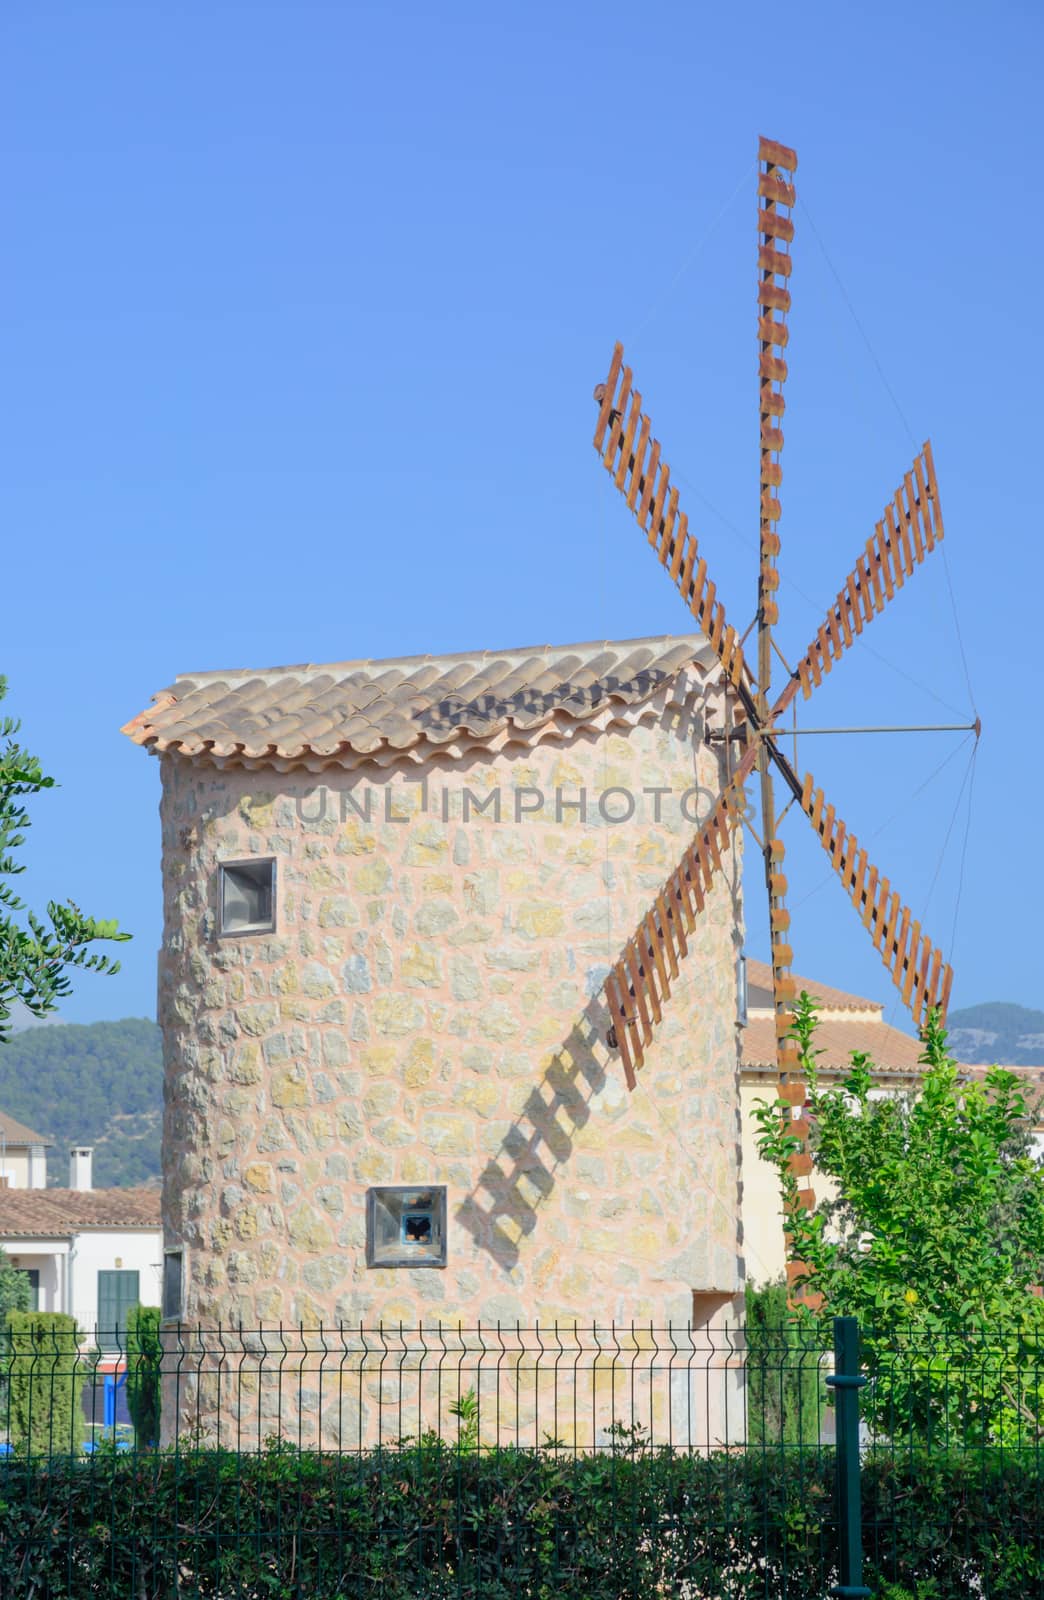 There are 3000 windmills in Majorca, many in bad condition. A restauration project is taking place initiated by the government of Mallorca. This one is situated in Binissalem.